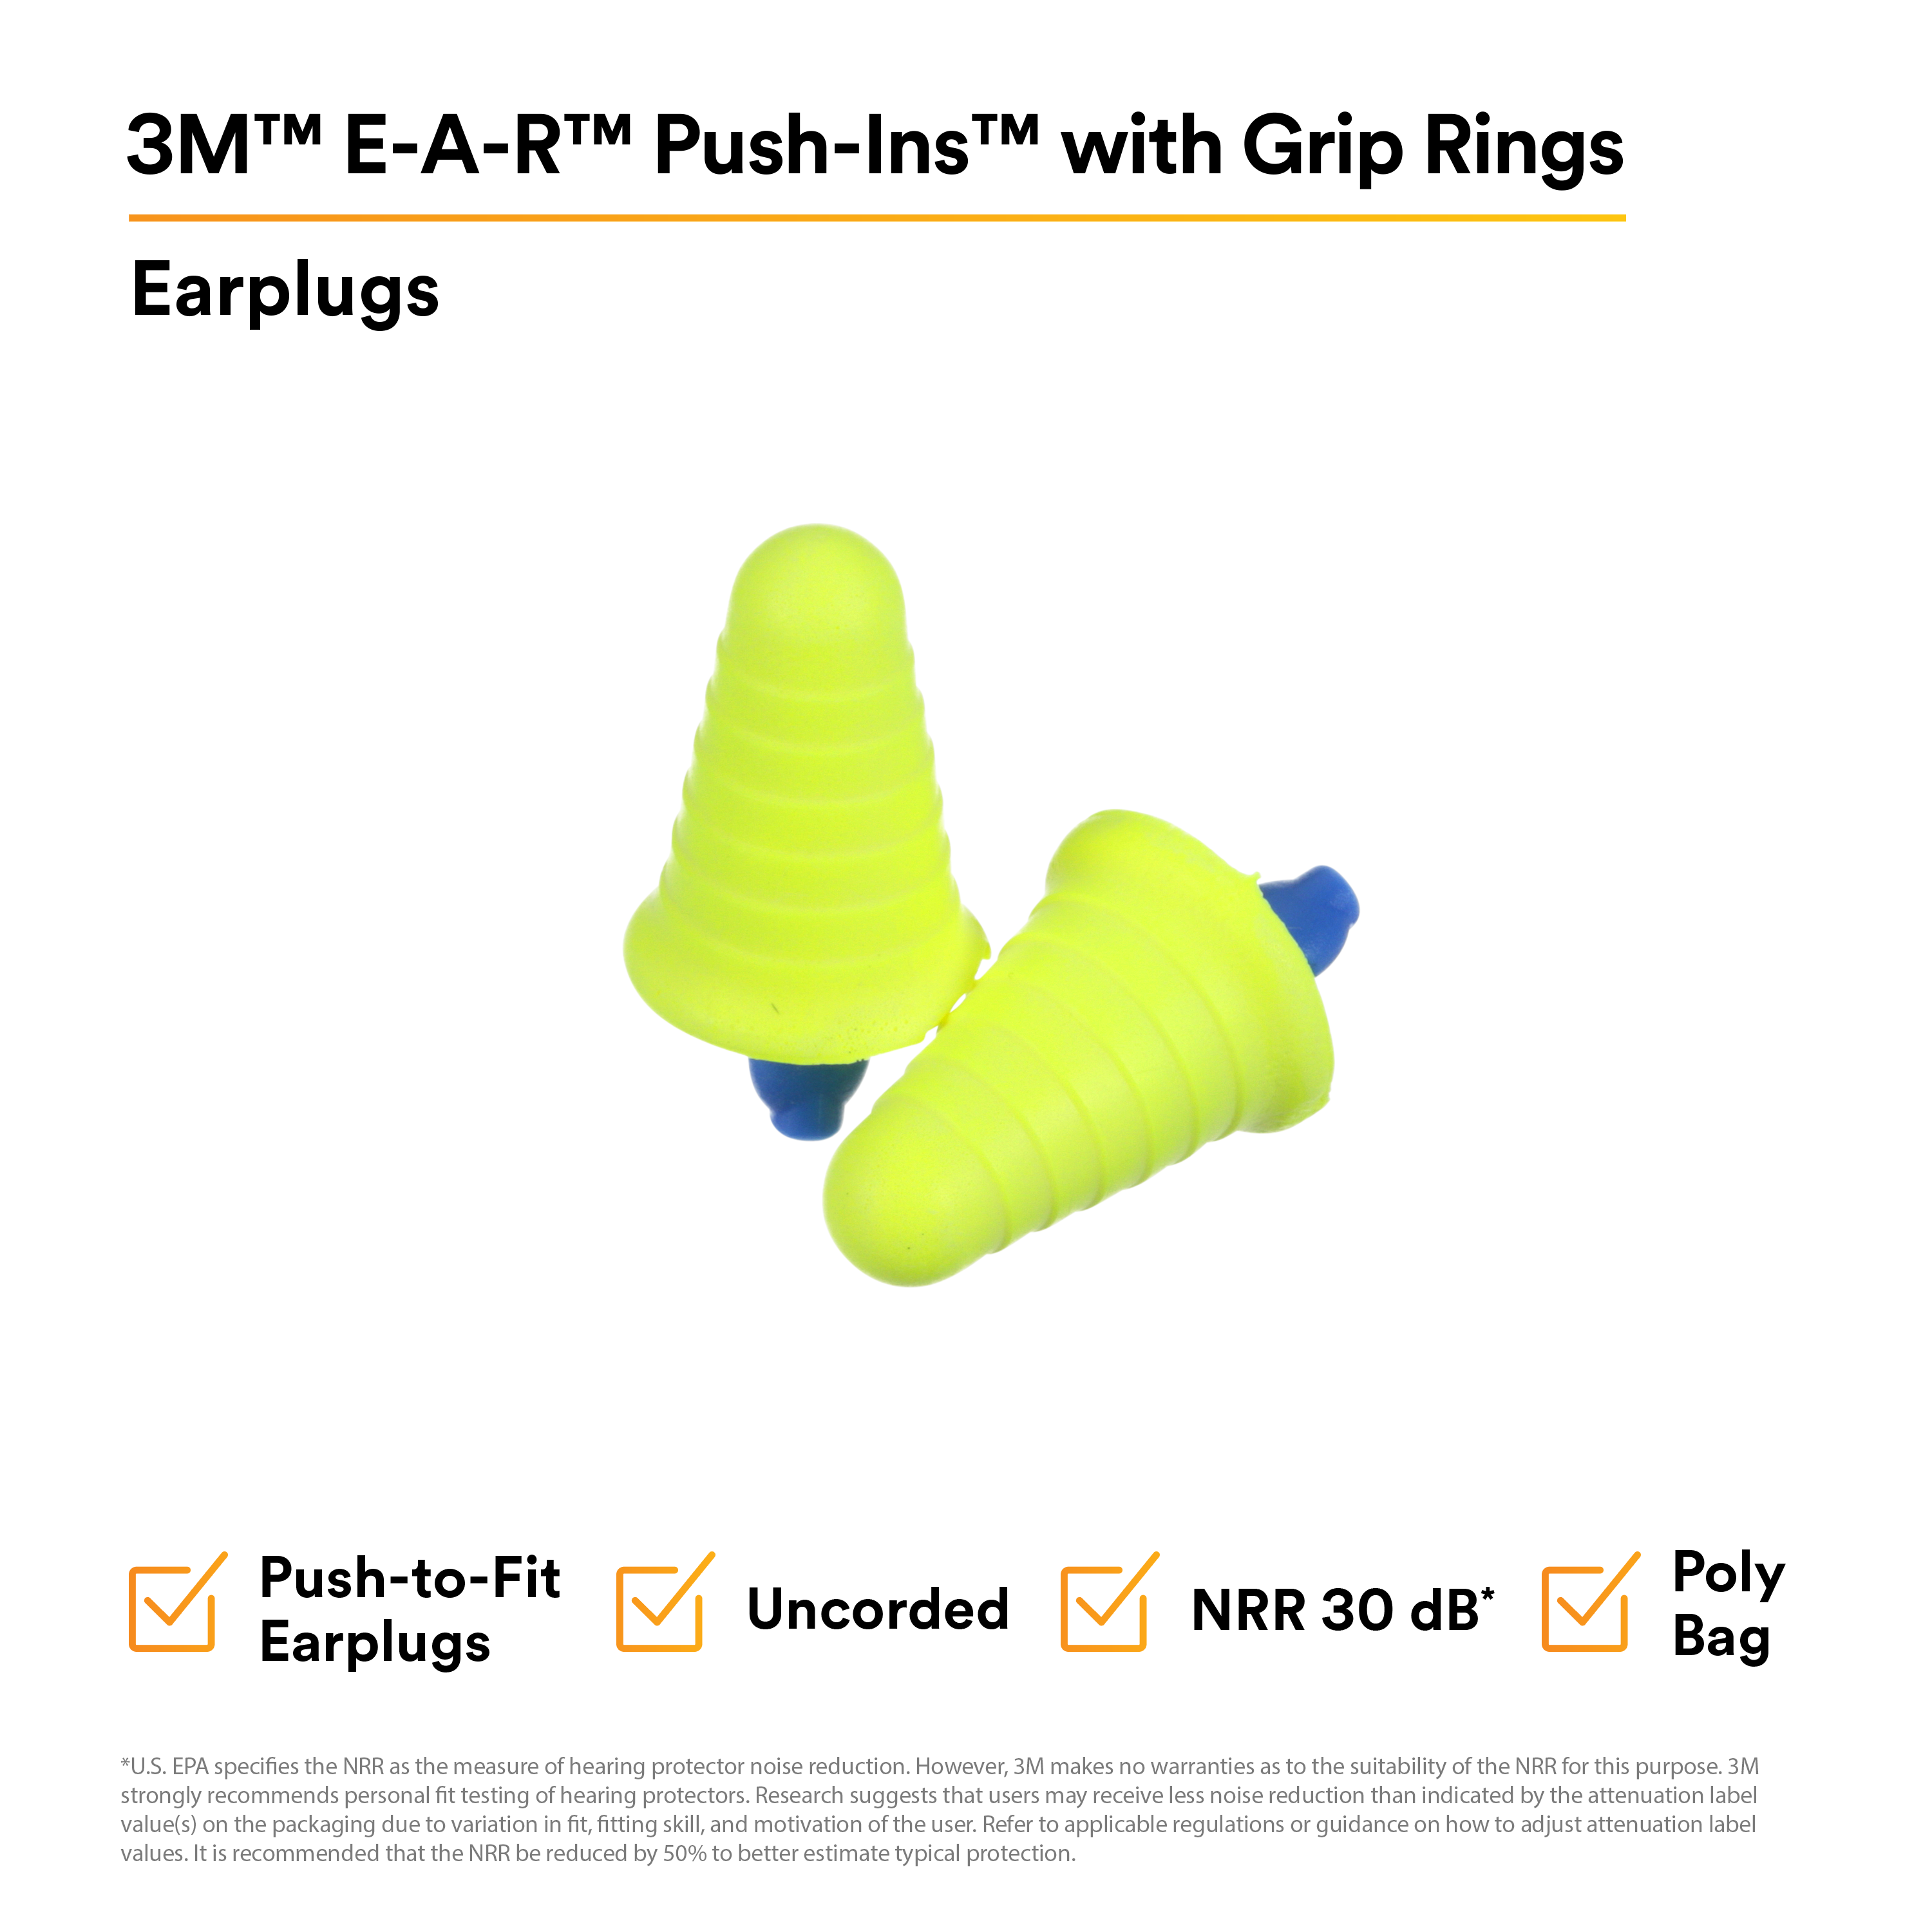 3M™ E-A-R™ Push-Ins™ Earplugs 318-1008, with Grip Rings, Uncorded, Poly Bag, 2000 Pair/Case